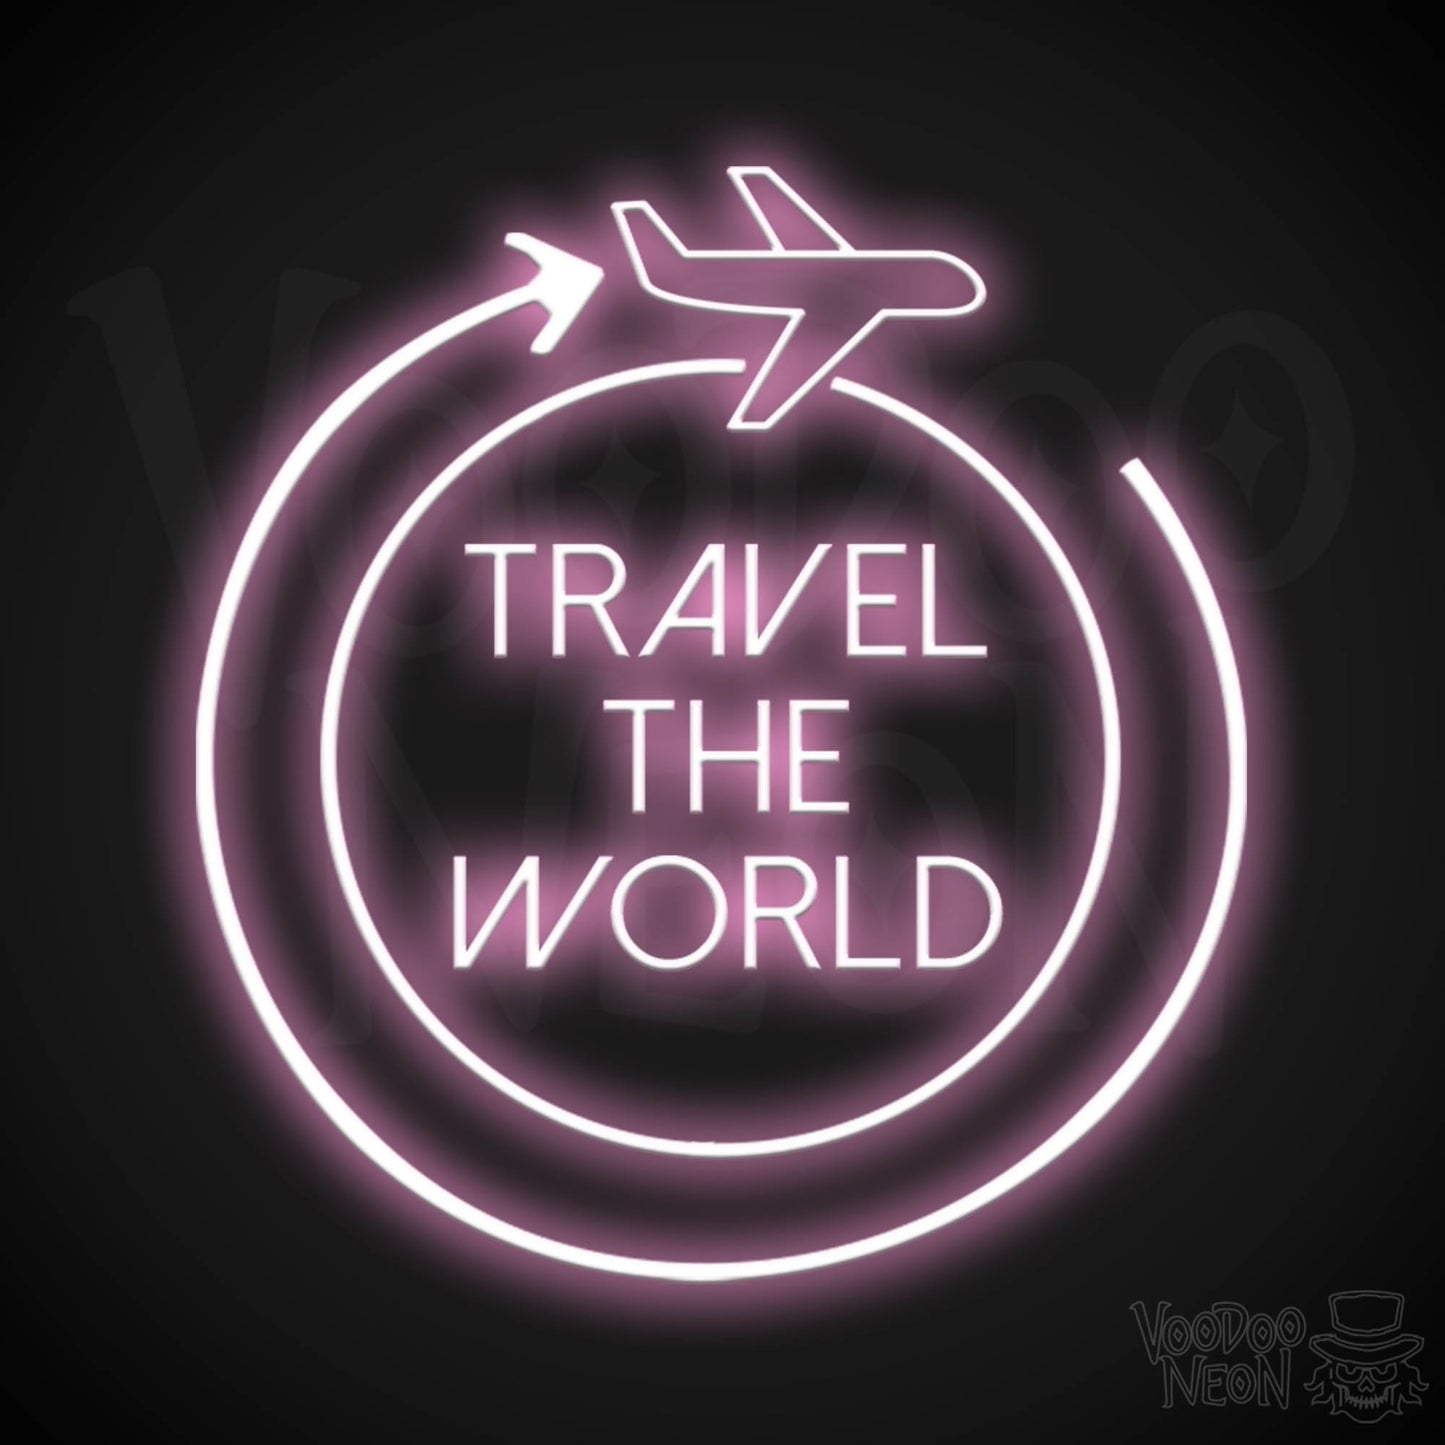 Let's Travel The World Neon Sign - LED Neon Wall Art - Color Light Pink